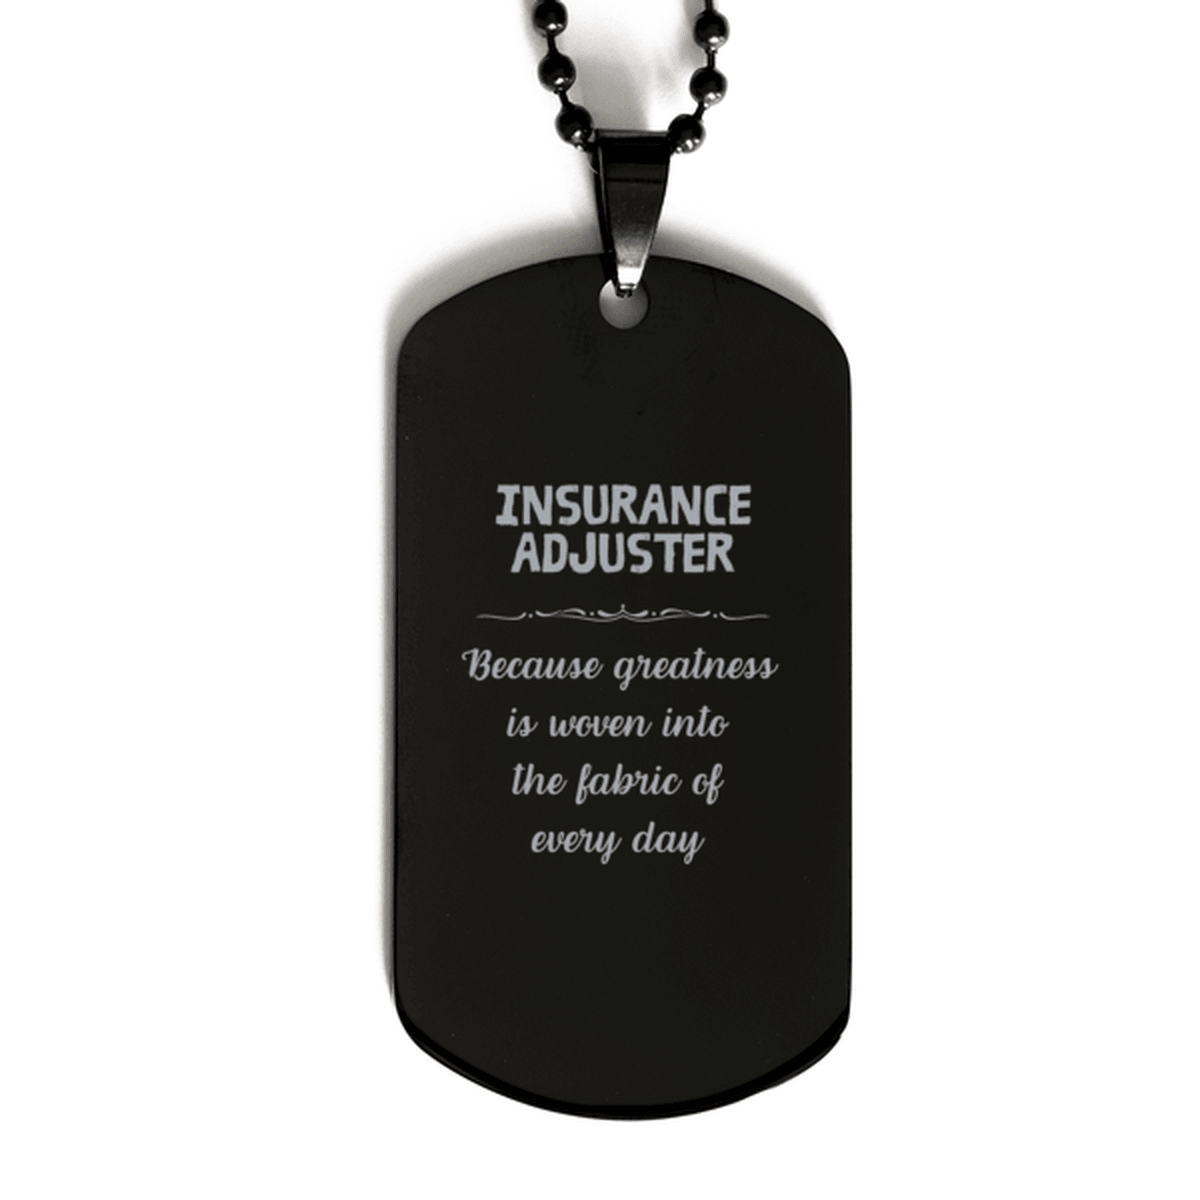 Sarcastic Insurance Adjuster Black Dog Tag Gifts, Christmas Holiday Gifts for Insurance Adjuster Birthday, Insurance Adjuster: Because greatness is woven into the fabric of every day, Coworkers, Friends - Mallard Moon Gift Shop